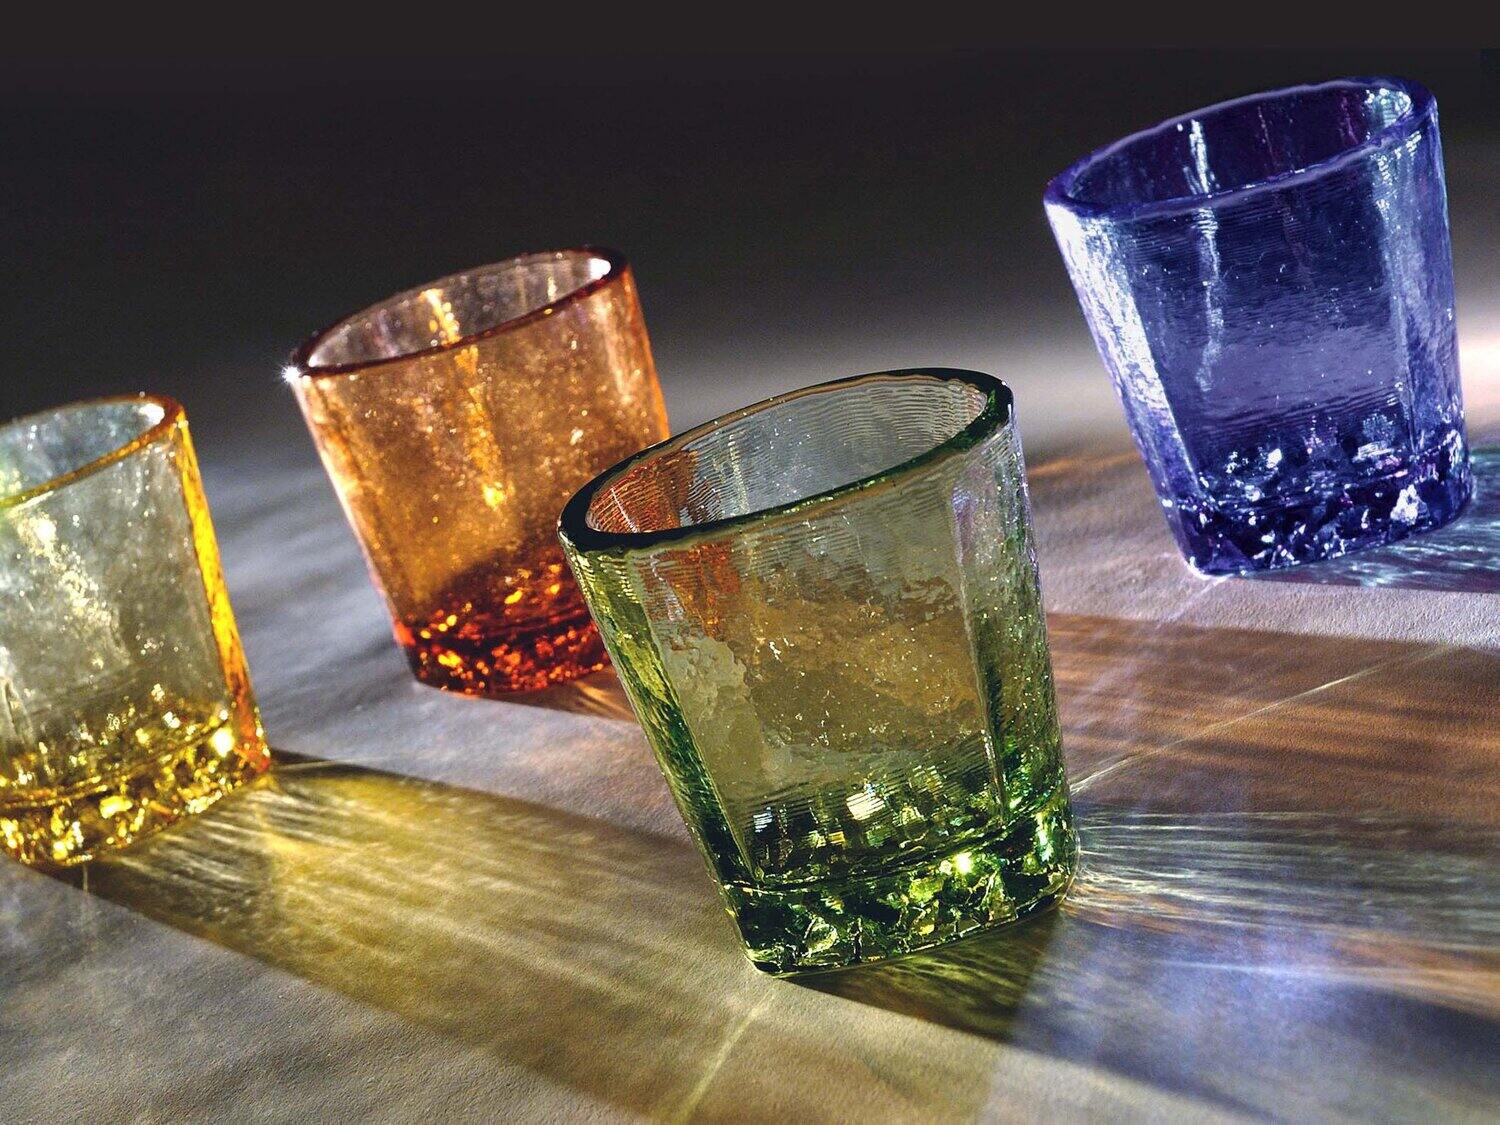 How To Identify Fire And Light Glassware